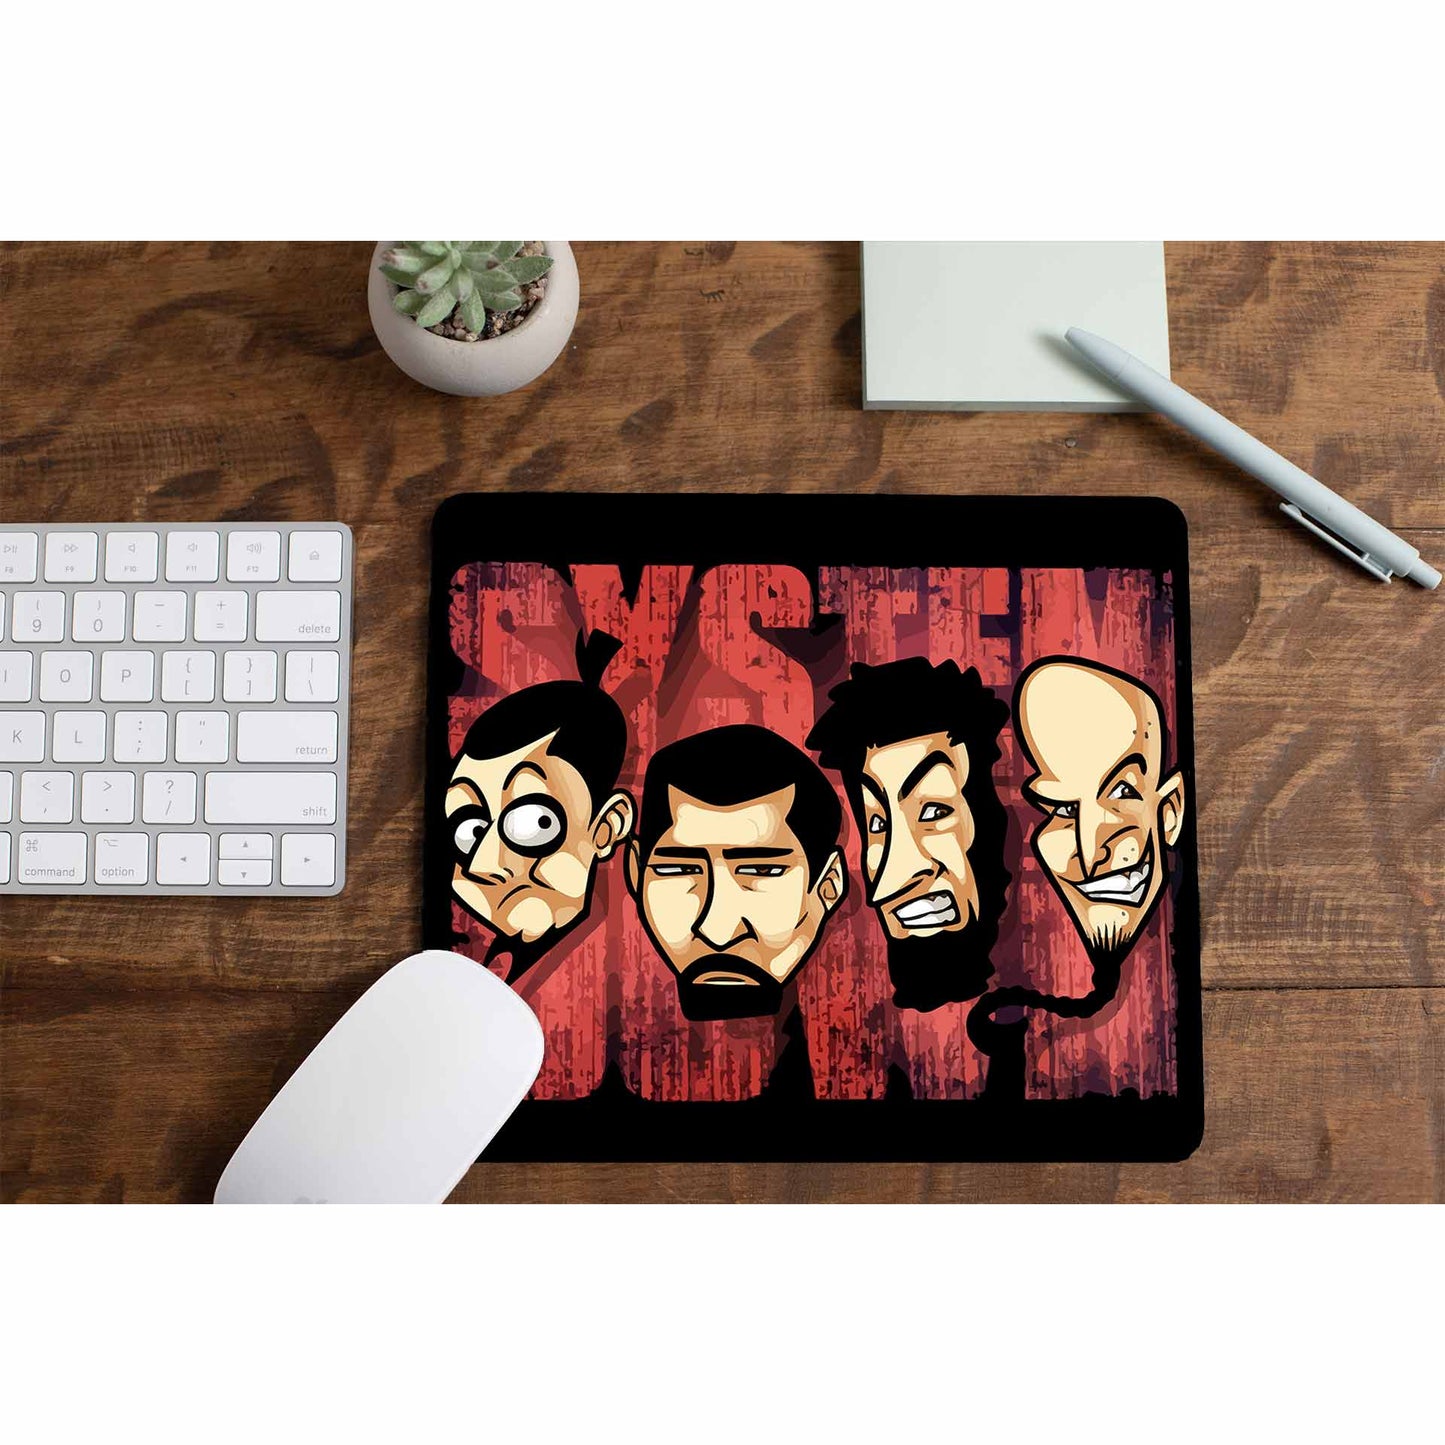 system of a down pop art mousepad logitech large anime music band buy online united states of america usa the banyan tee tbt men women girls boys unisex